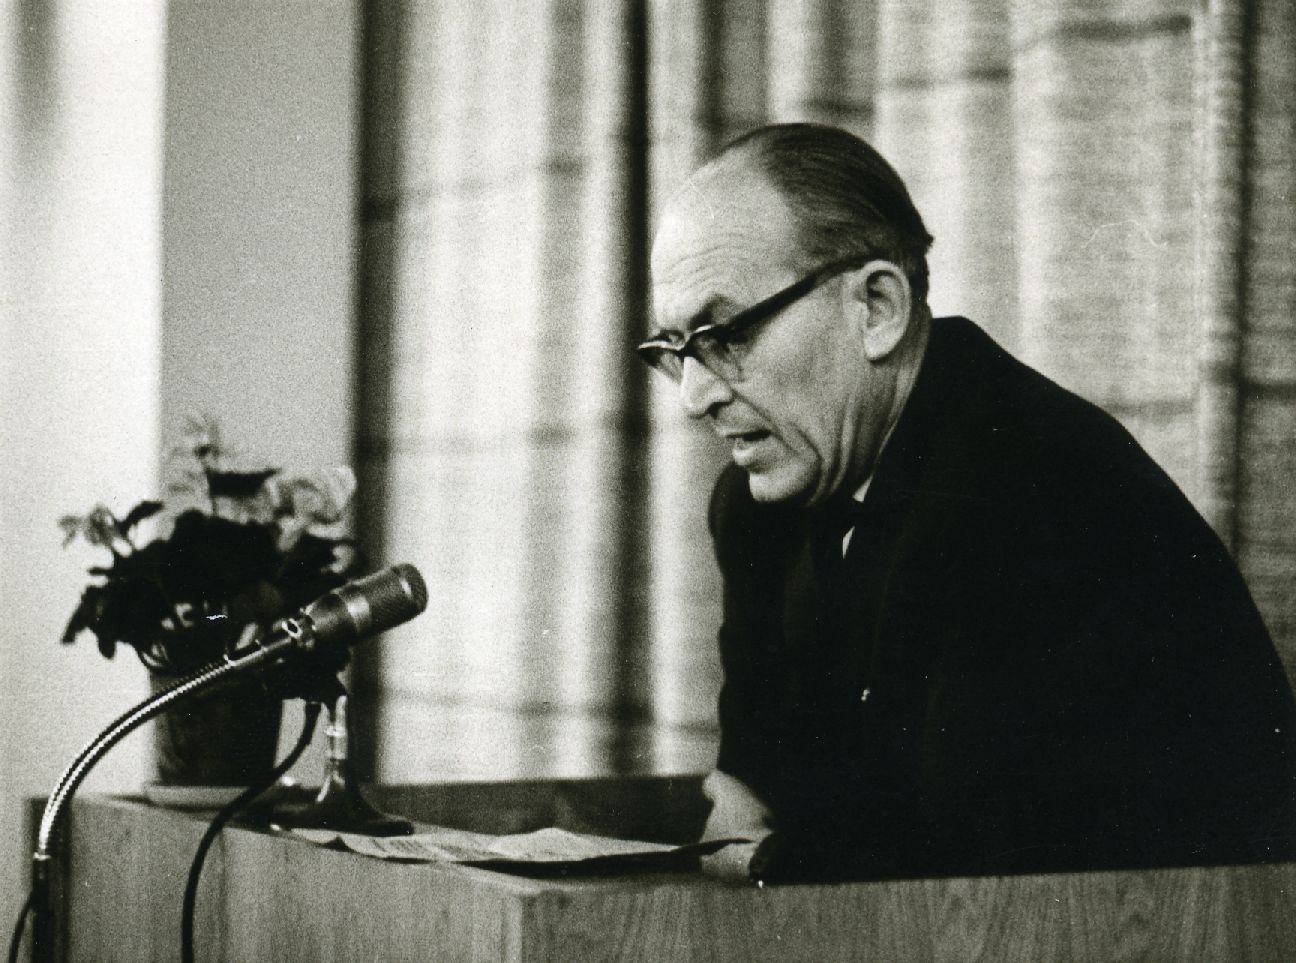 August Sang Literature evening at the House of Writers in Tallinn 17.02.1966.